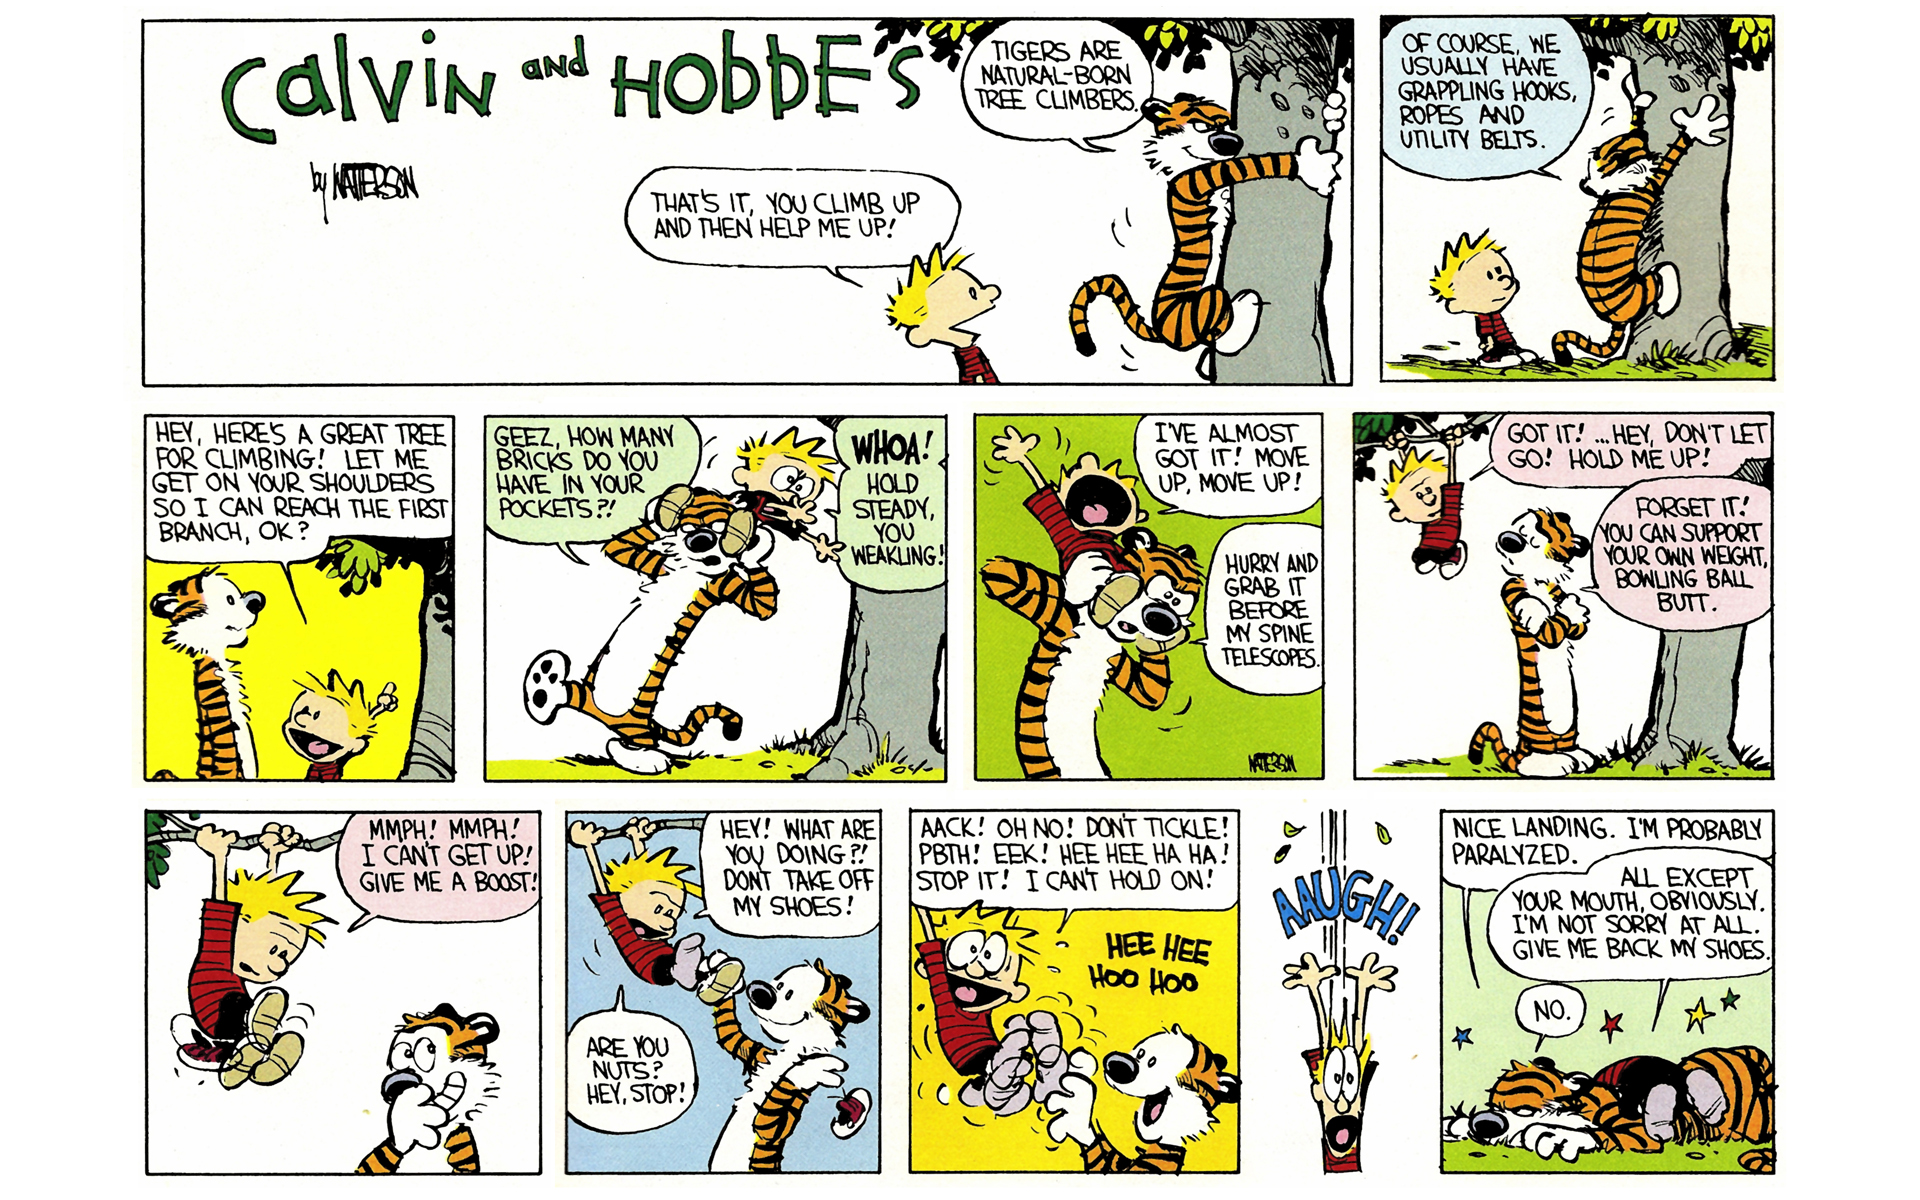 Read online Calvin and Hobbes comic - Issue #3.